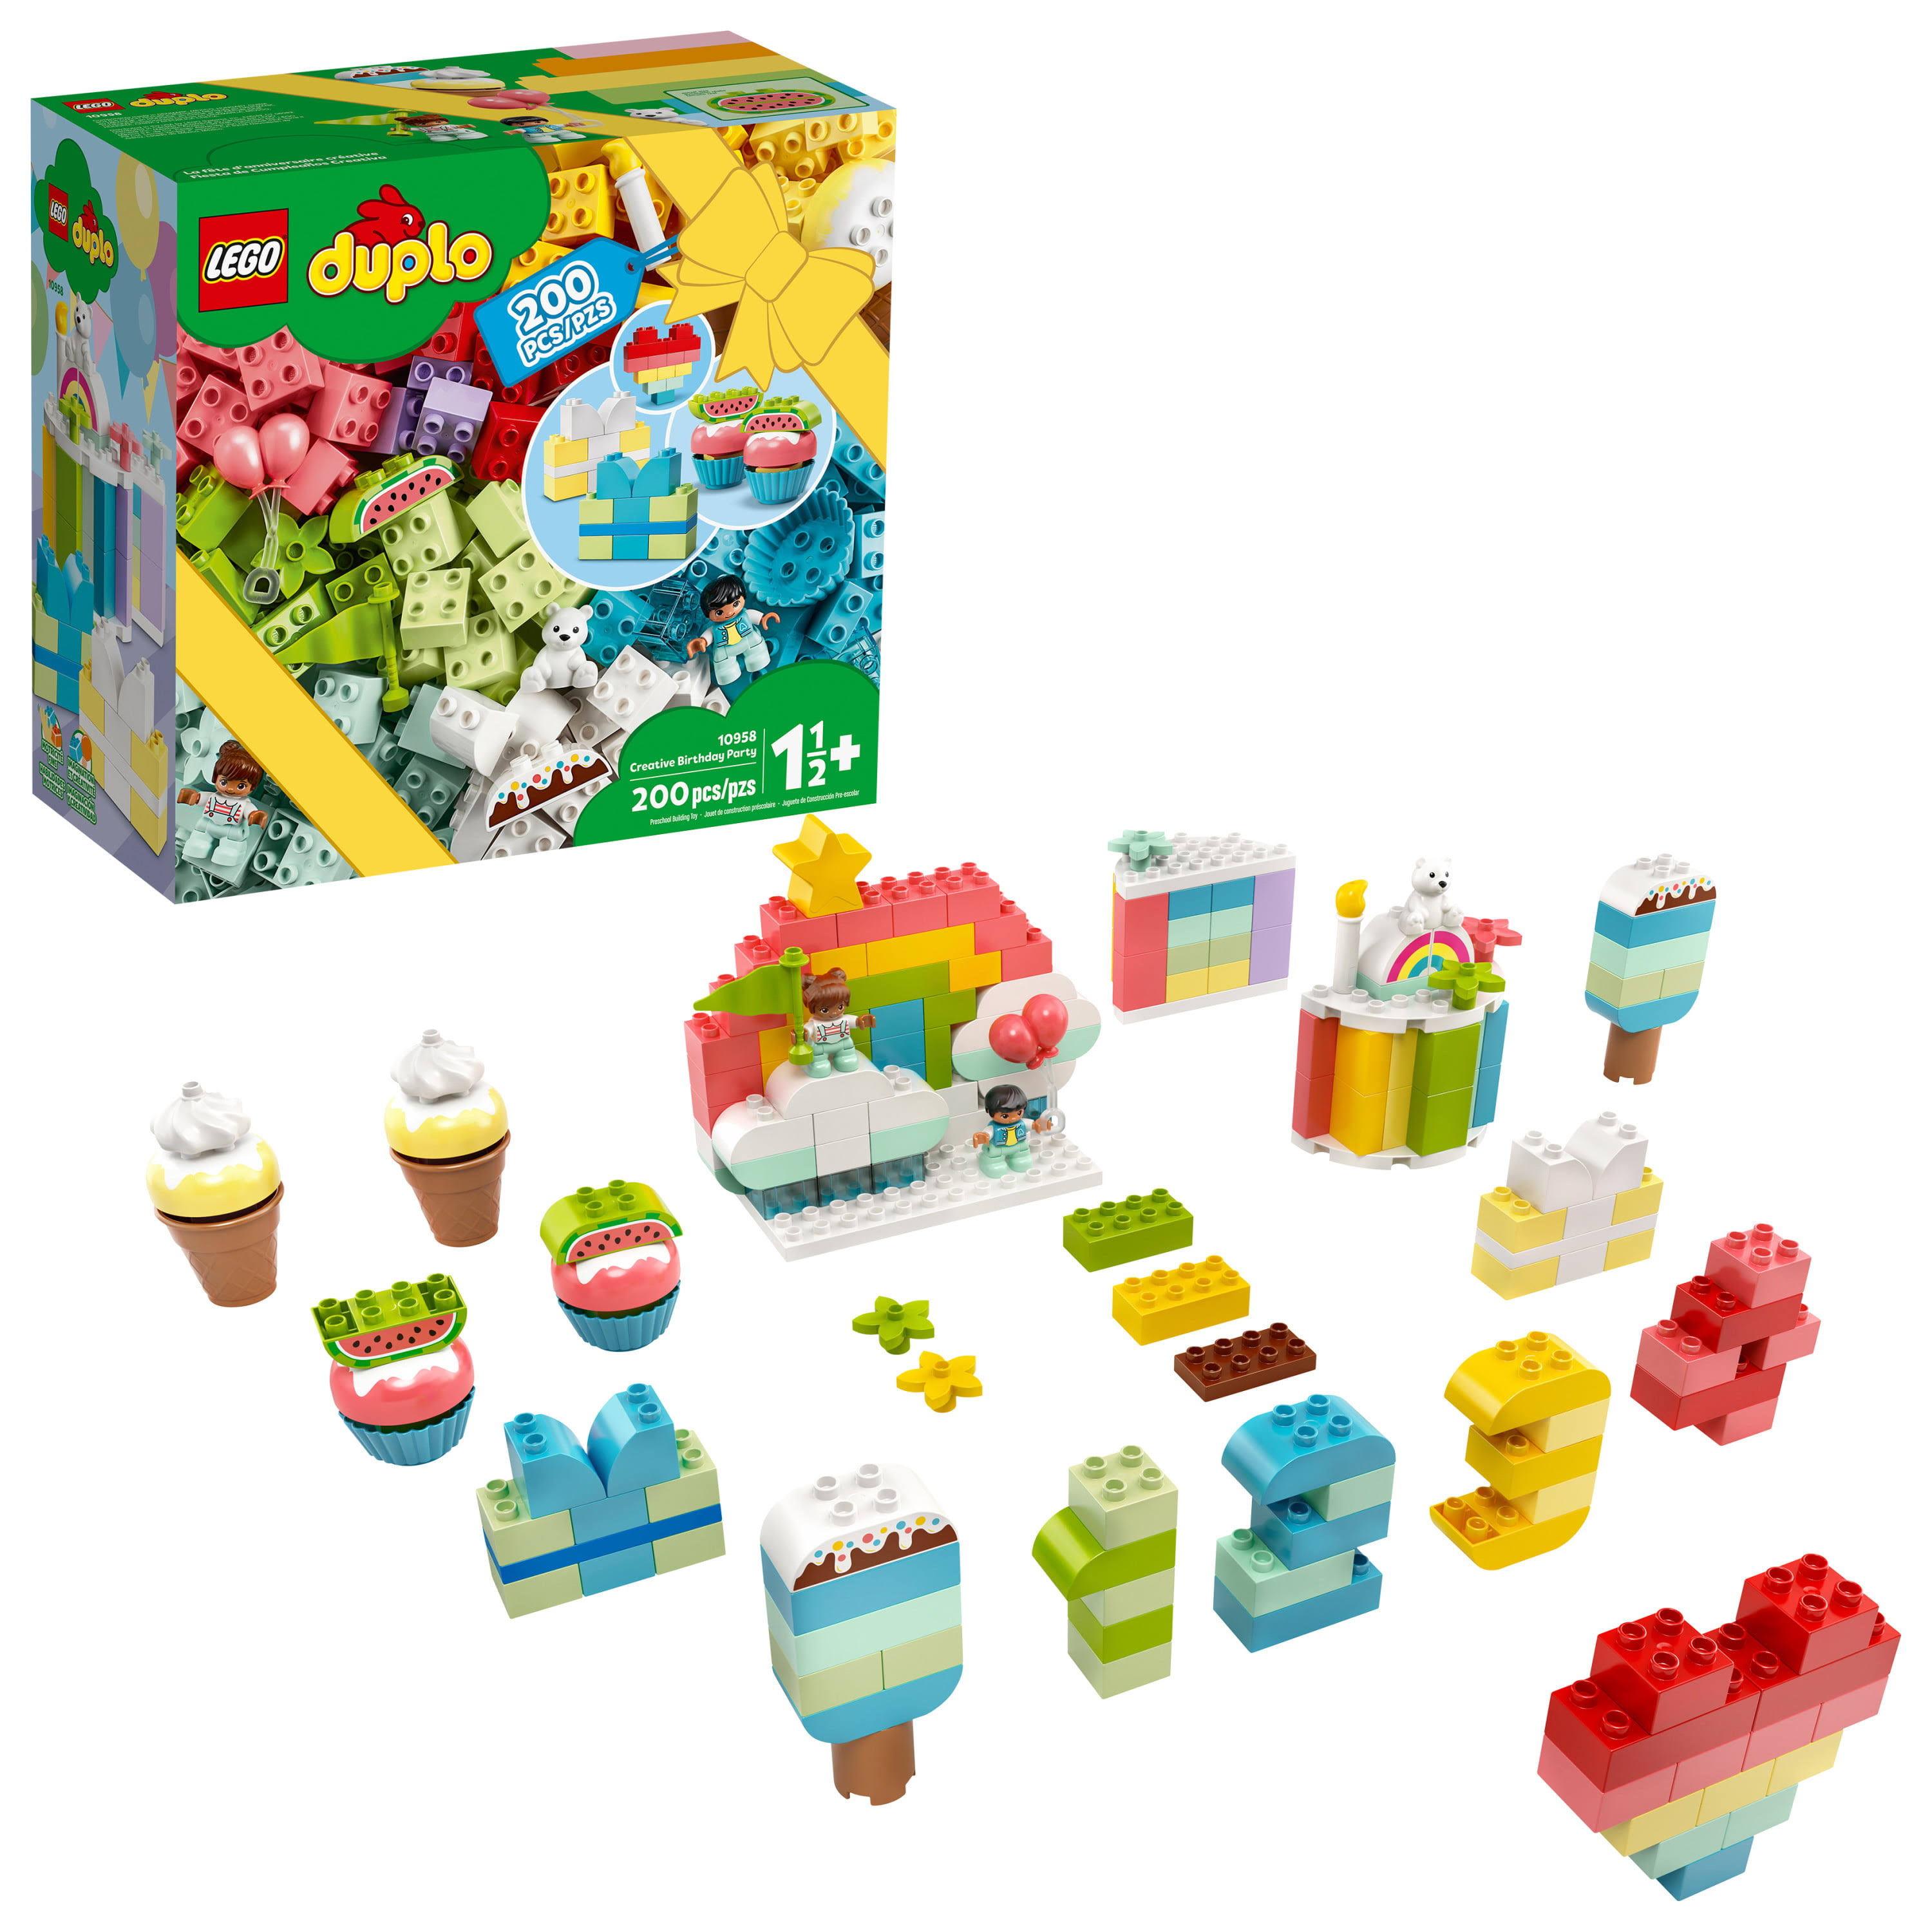 LEGO Duplo Classic Creative Birthday Party 10958 Imaginative Building Fun for Toddlers; Creative Toy Gift for Kids, New 2021 (200 Pieces)